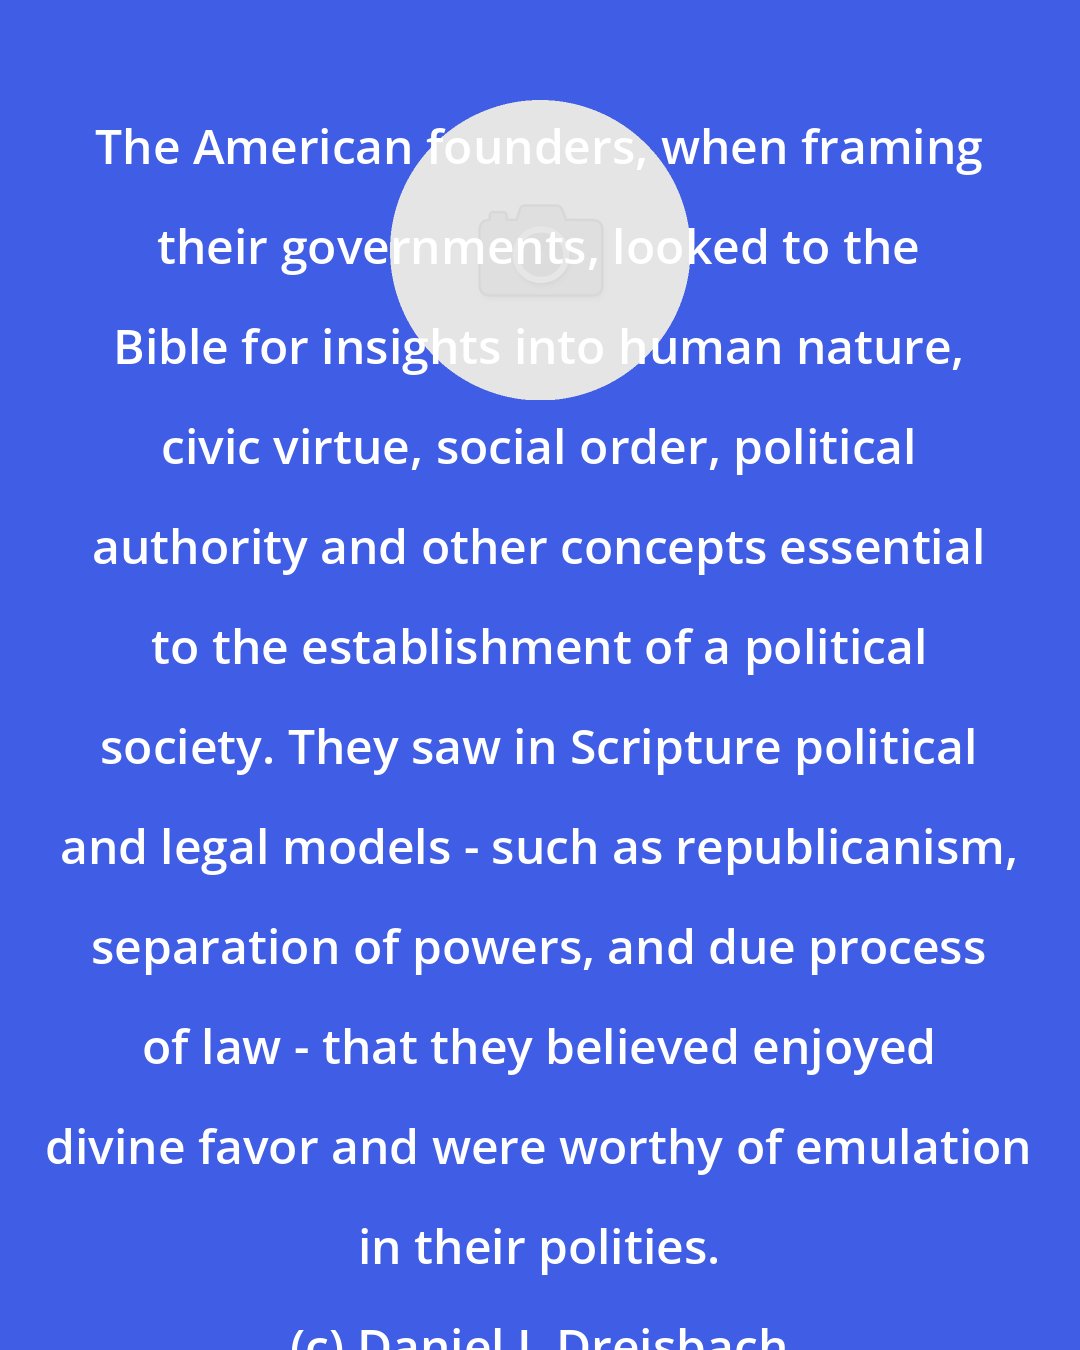 Daniel L Dreisbach: The American founders, when framing their governments, looked to the Bible for insights into human nature, civic virtue, social order, political authority and other concepts essential to the establishment of a political society. They saw in Scripture political and legal models - such as republicanism, separation of powers, and due process of law - that they believed enjoyed divine favor and were worthy of emulation in their polities.